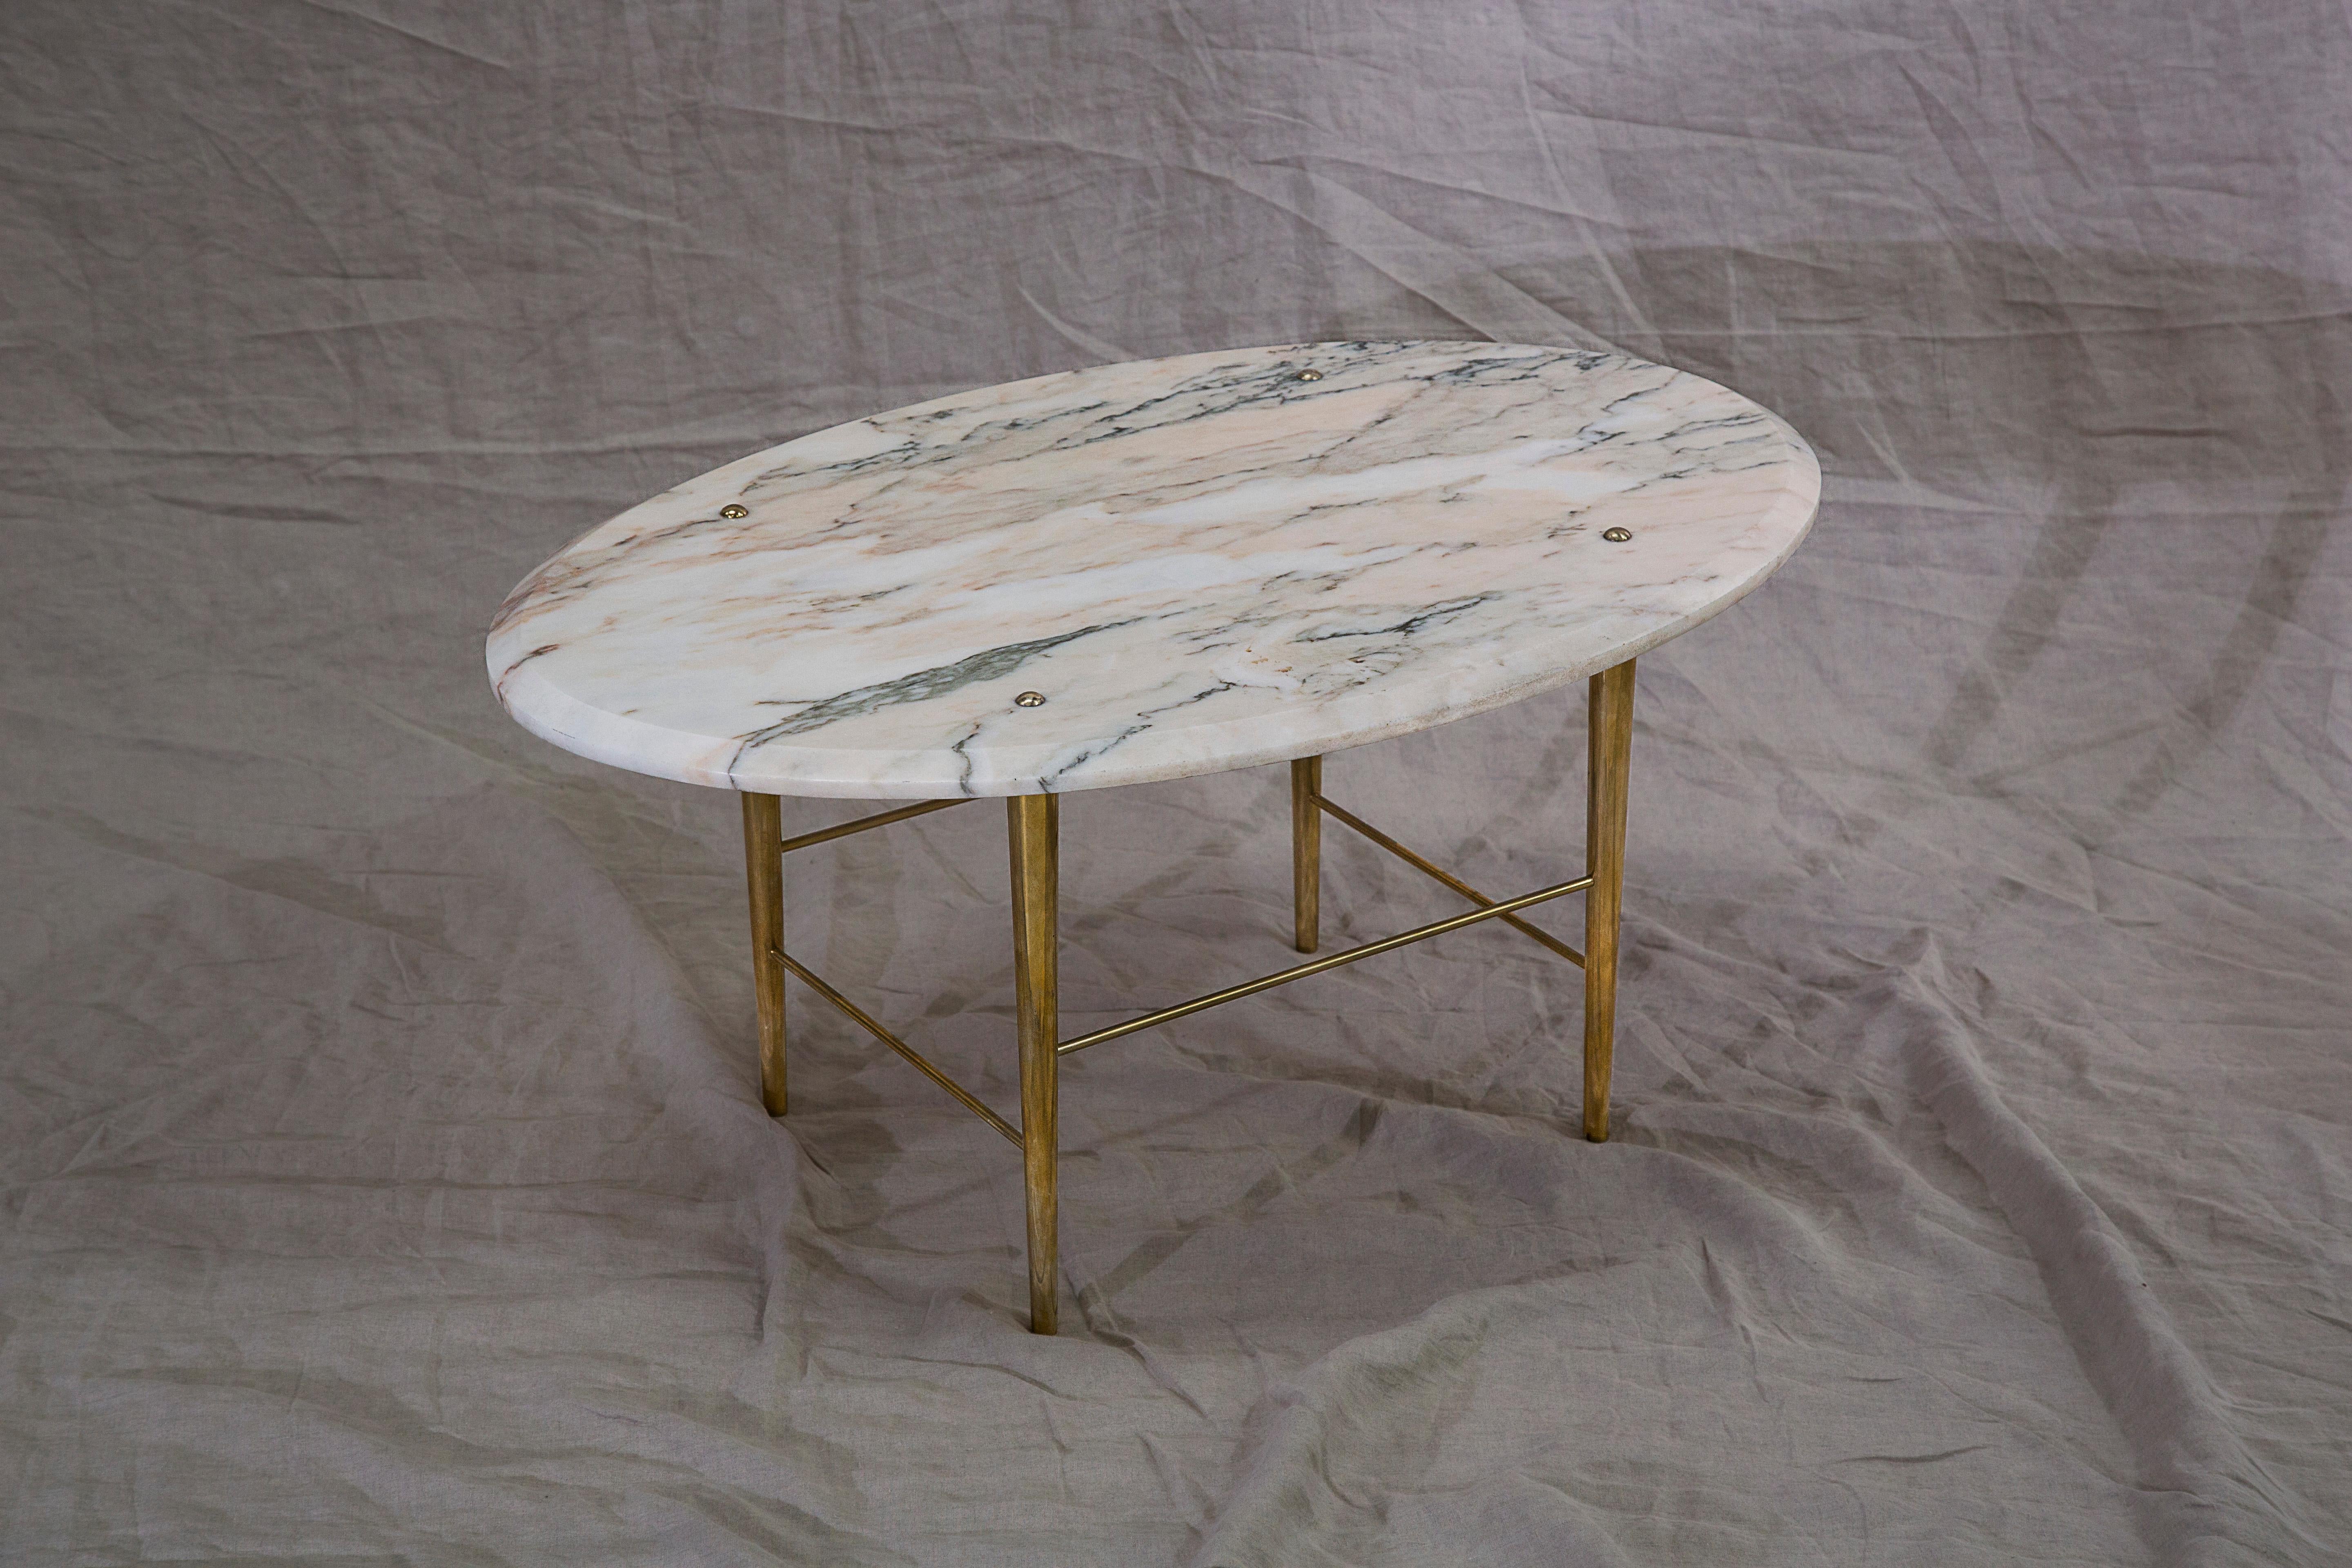 A coffee table in Portuguese marble and polished brass. Handcrafted to order in Northern England.

Measures: 800 mm (L) x 500 mm (W) x 400 mm (H)

Bespoke sizes and finishes available.